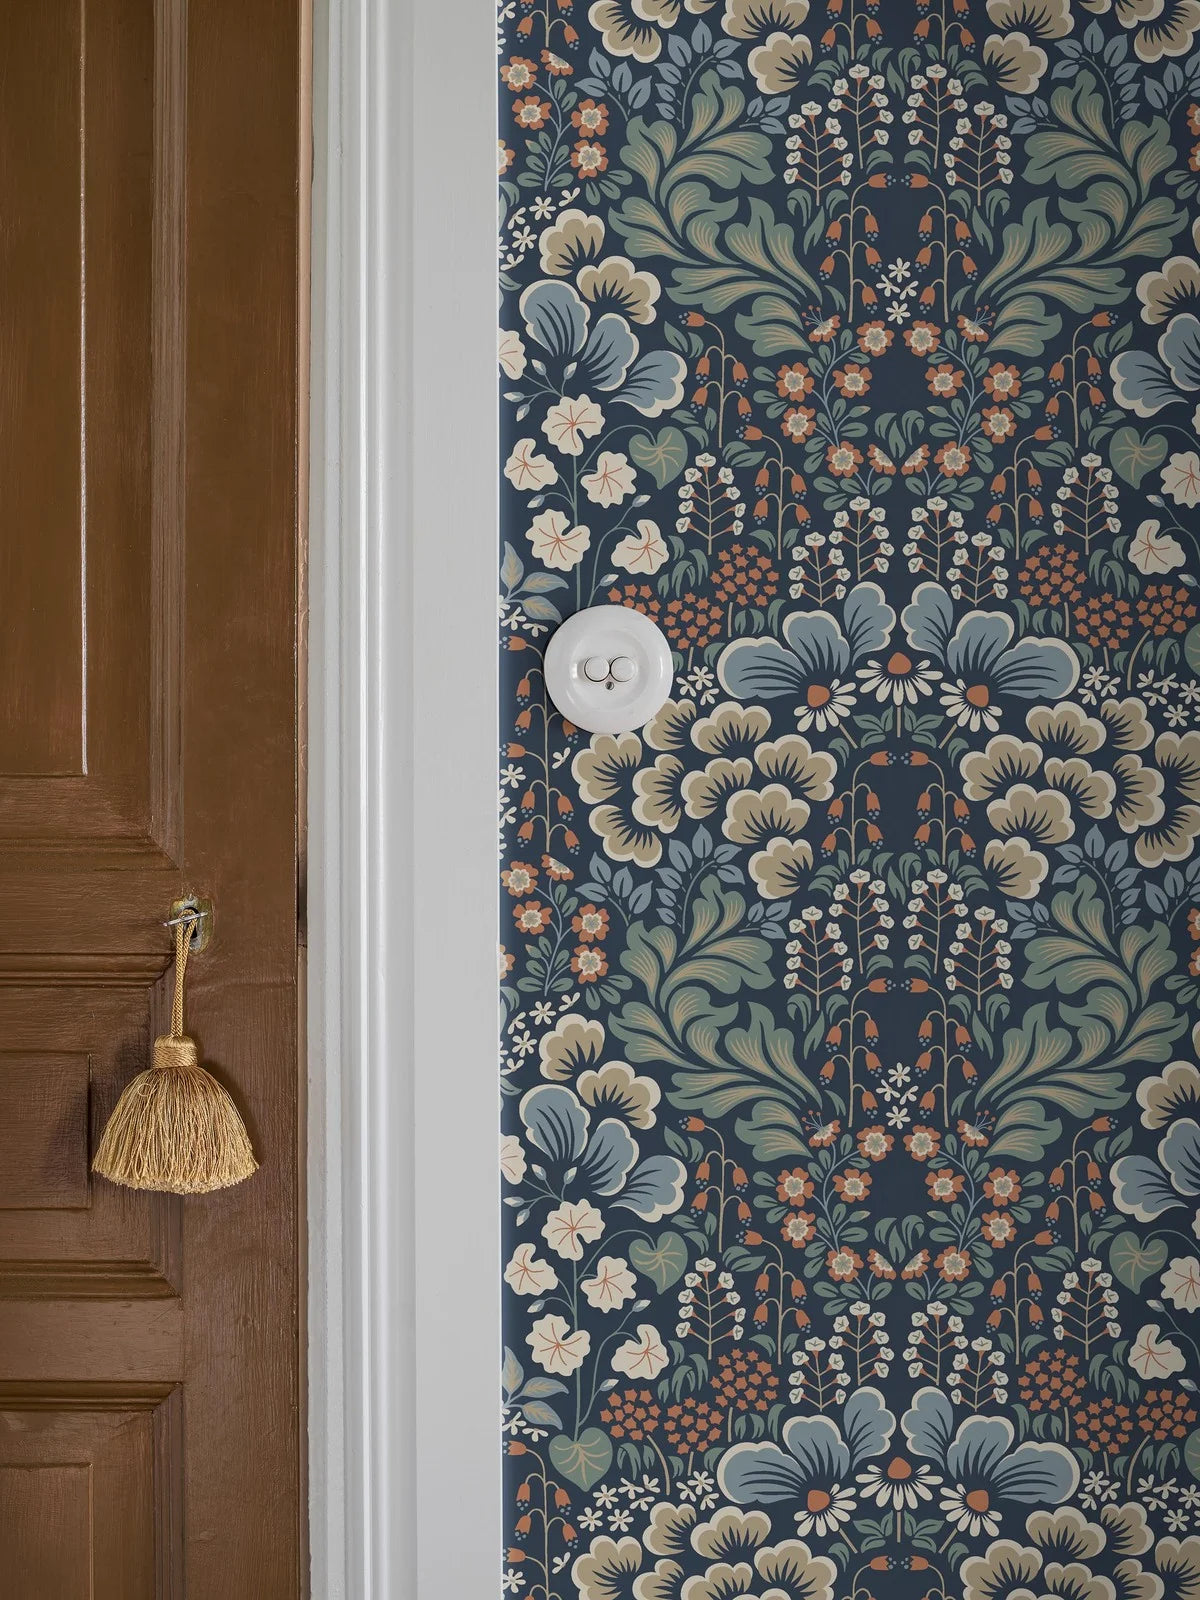 Set on a midnight blue background, our Blomstervall wallpaper in a surface print brings to life a lush pattern of green leaves, beige and blue puff-shapes, and red and white flowers.